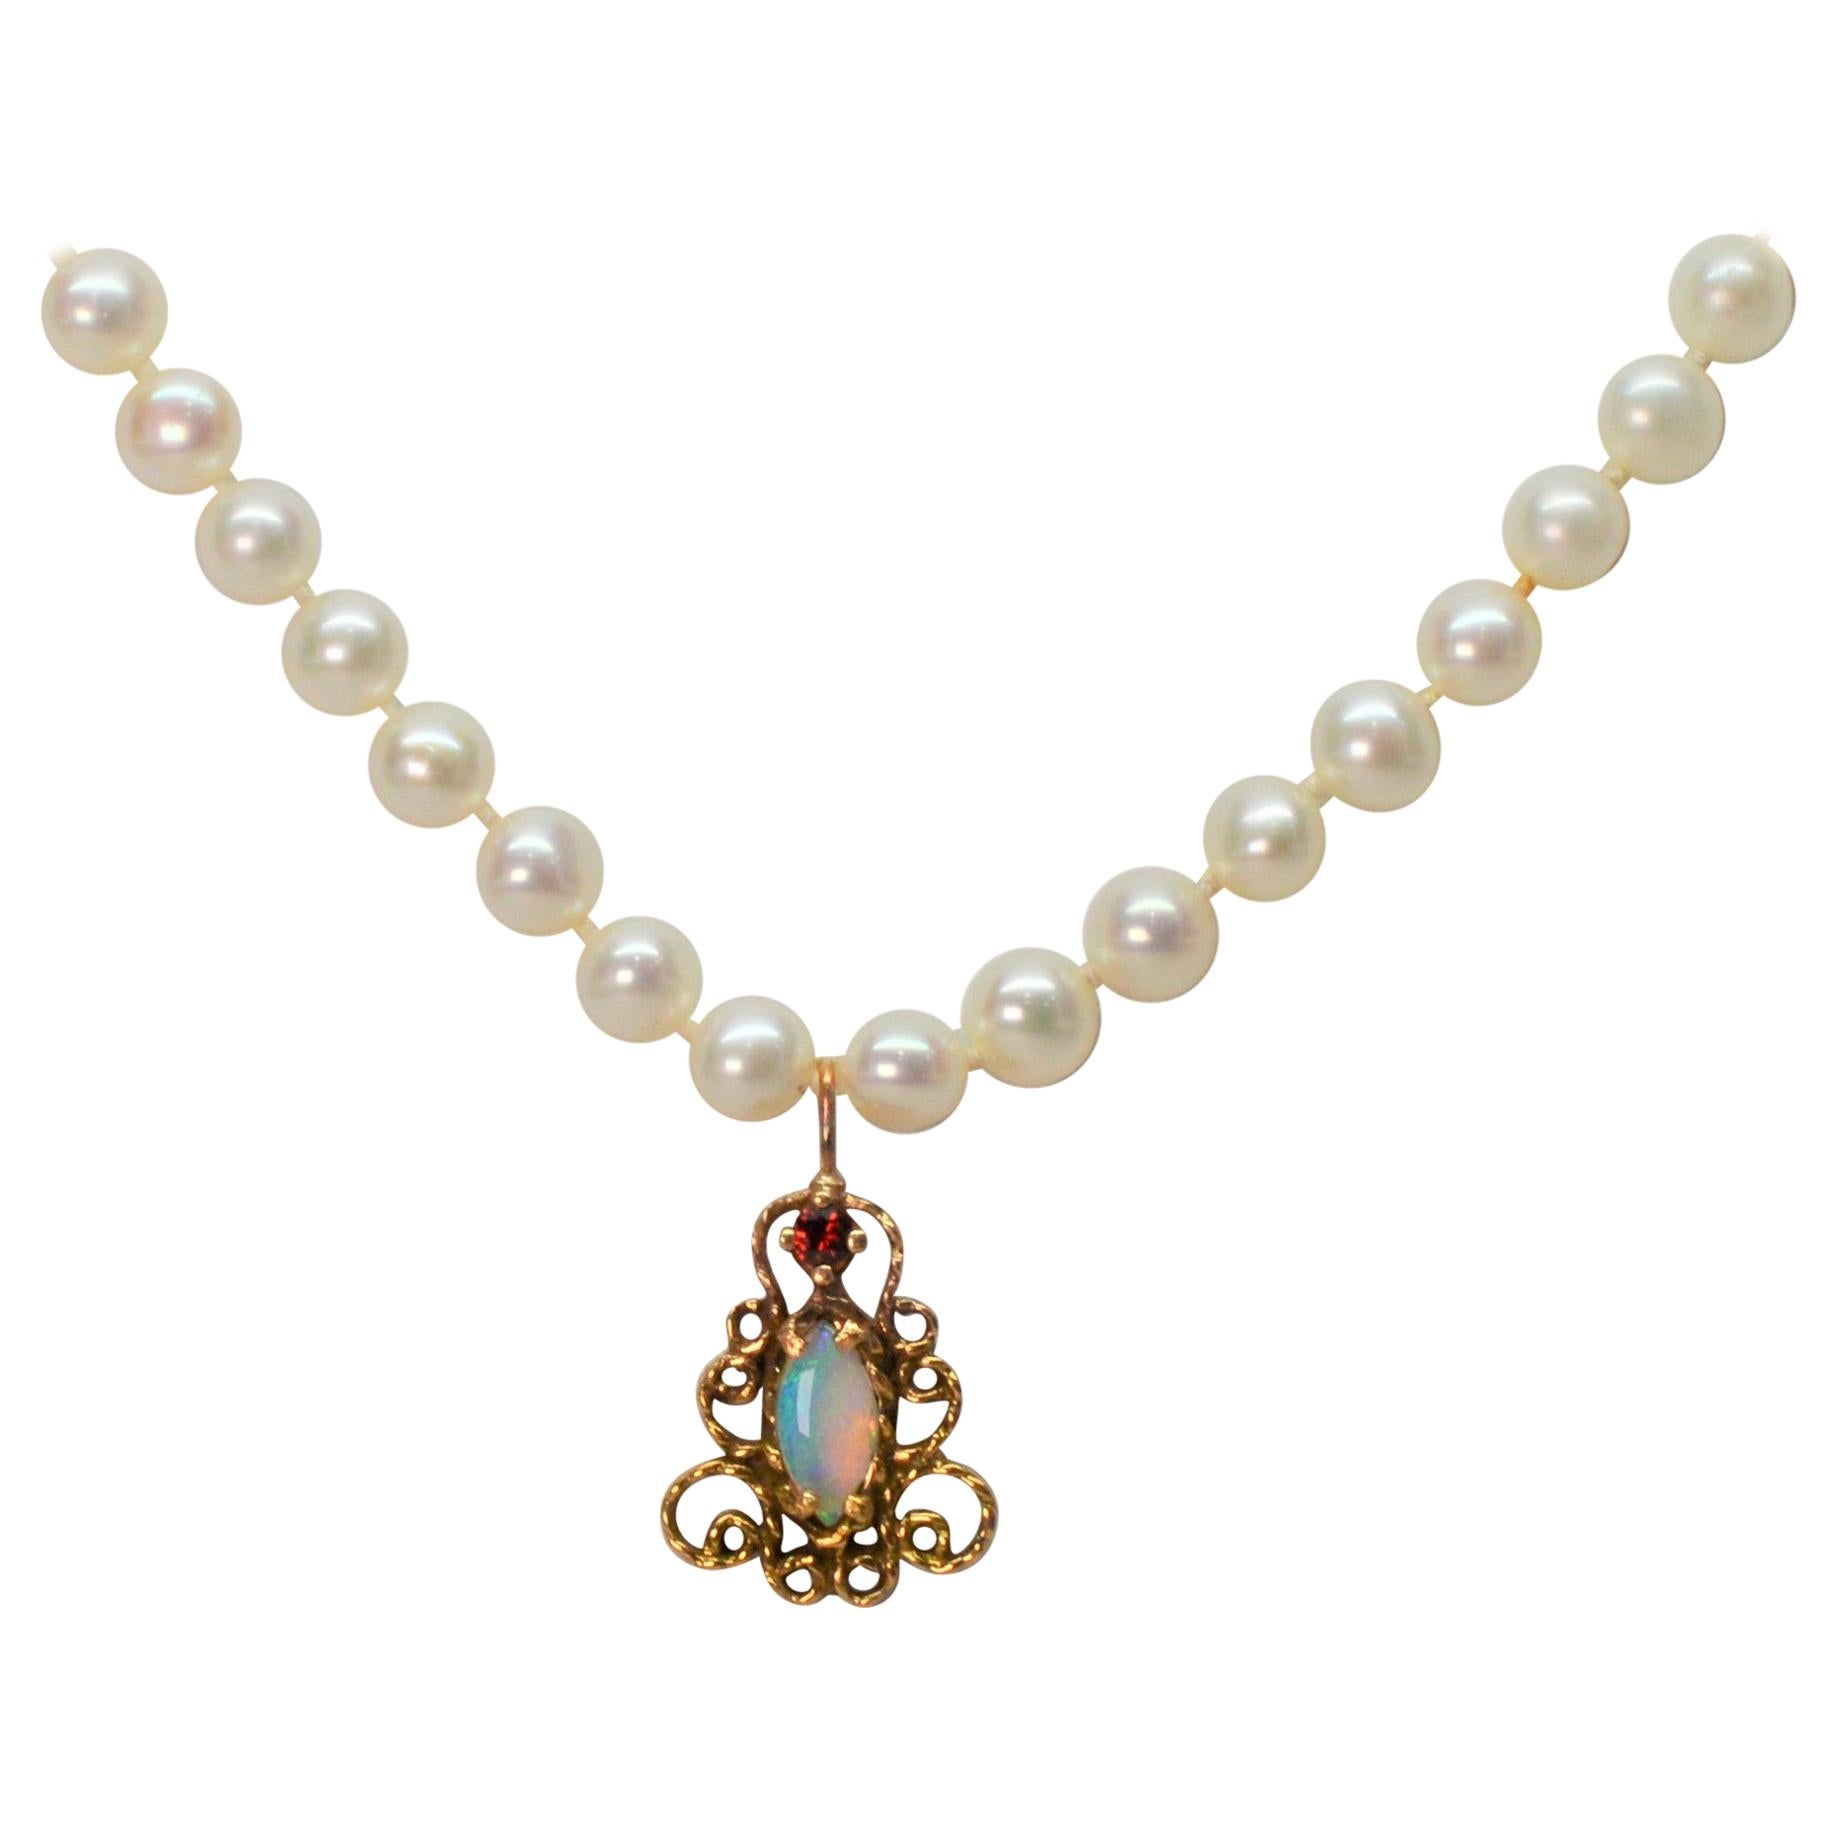 Antique-Style Opal Ruby Yellow Gold Charm Pendant on Pearl Necklace